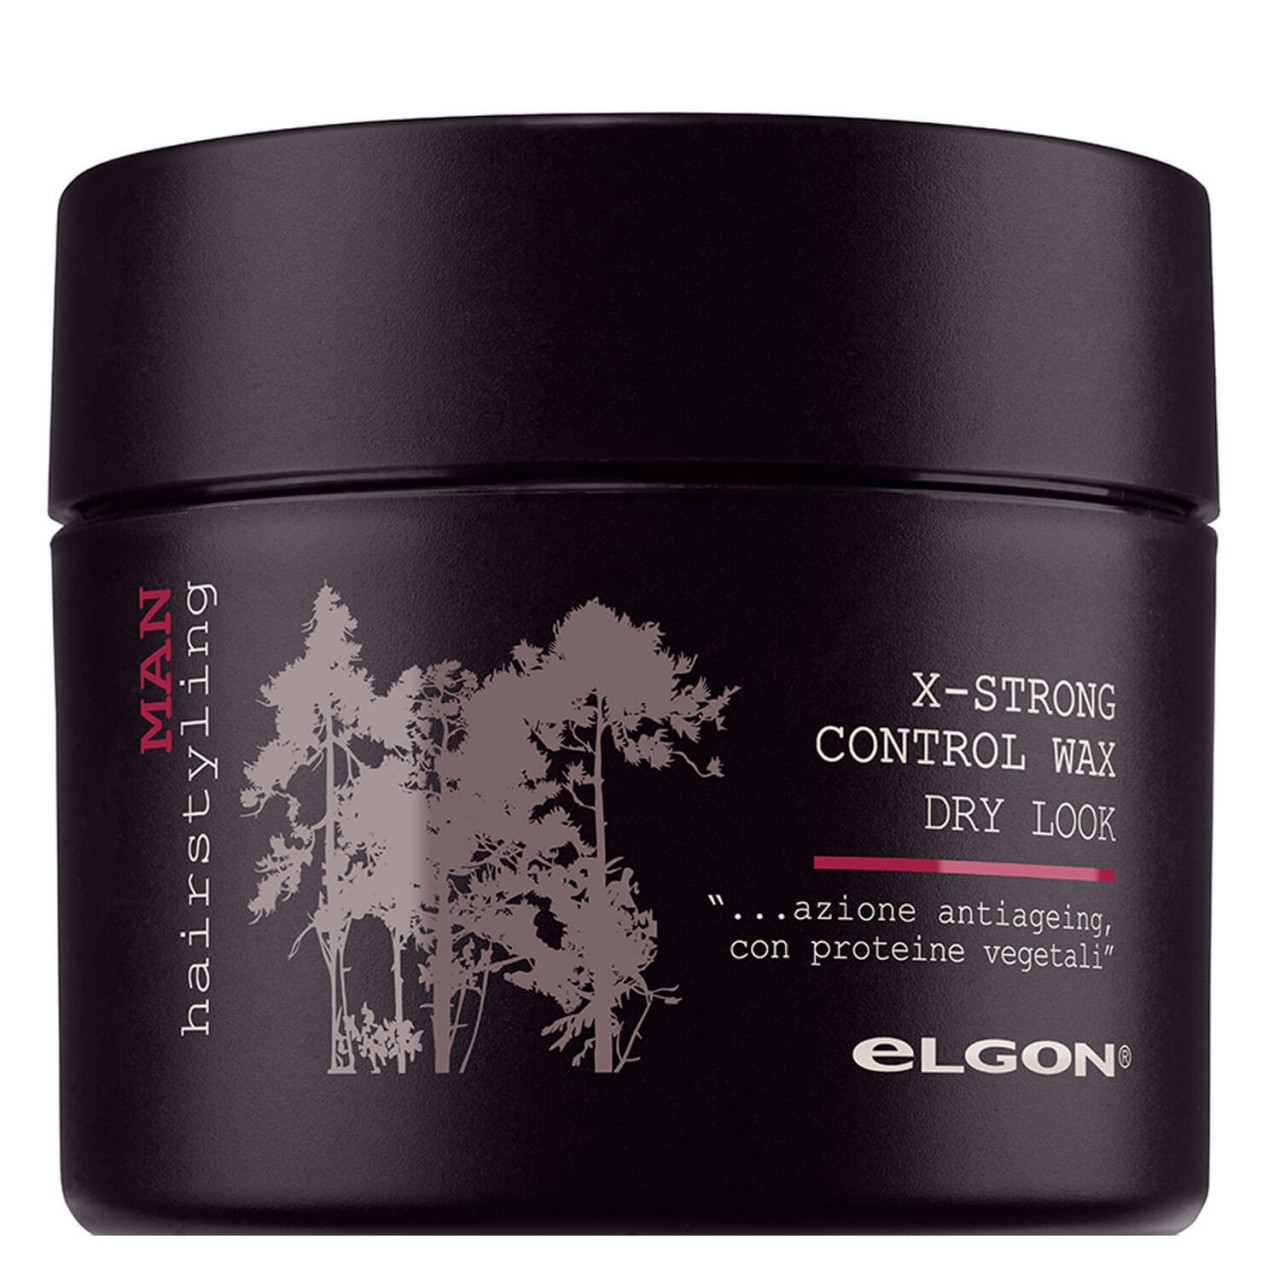 Elgon for Men - X-Strong Control Wax von Elgon